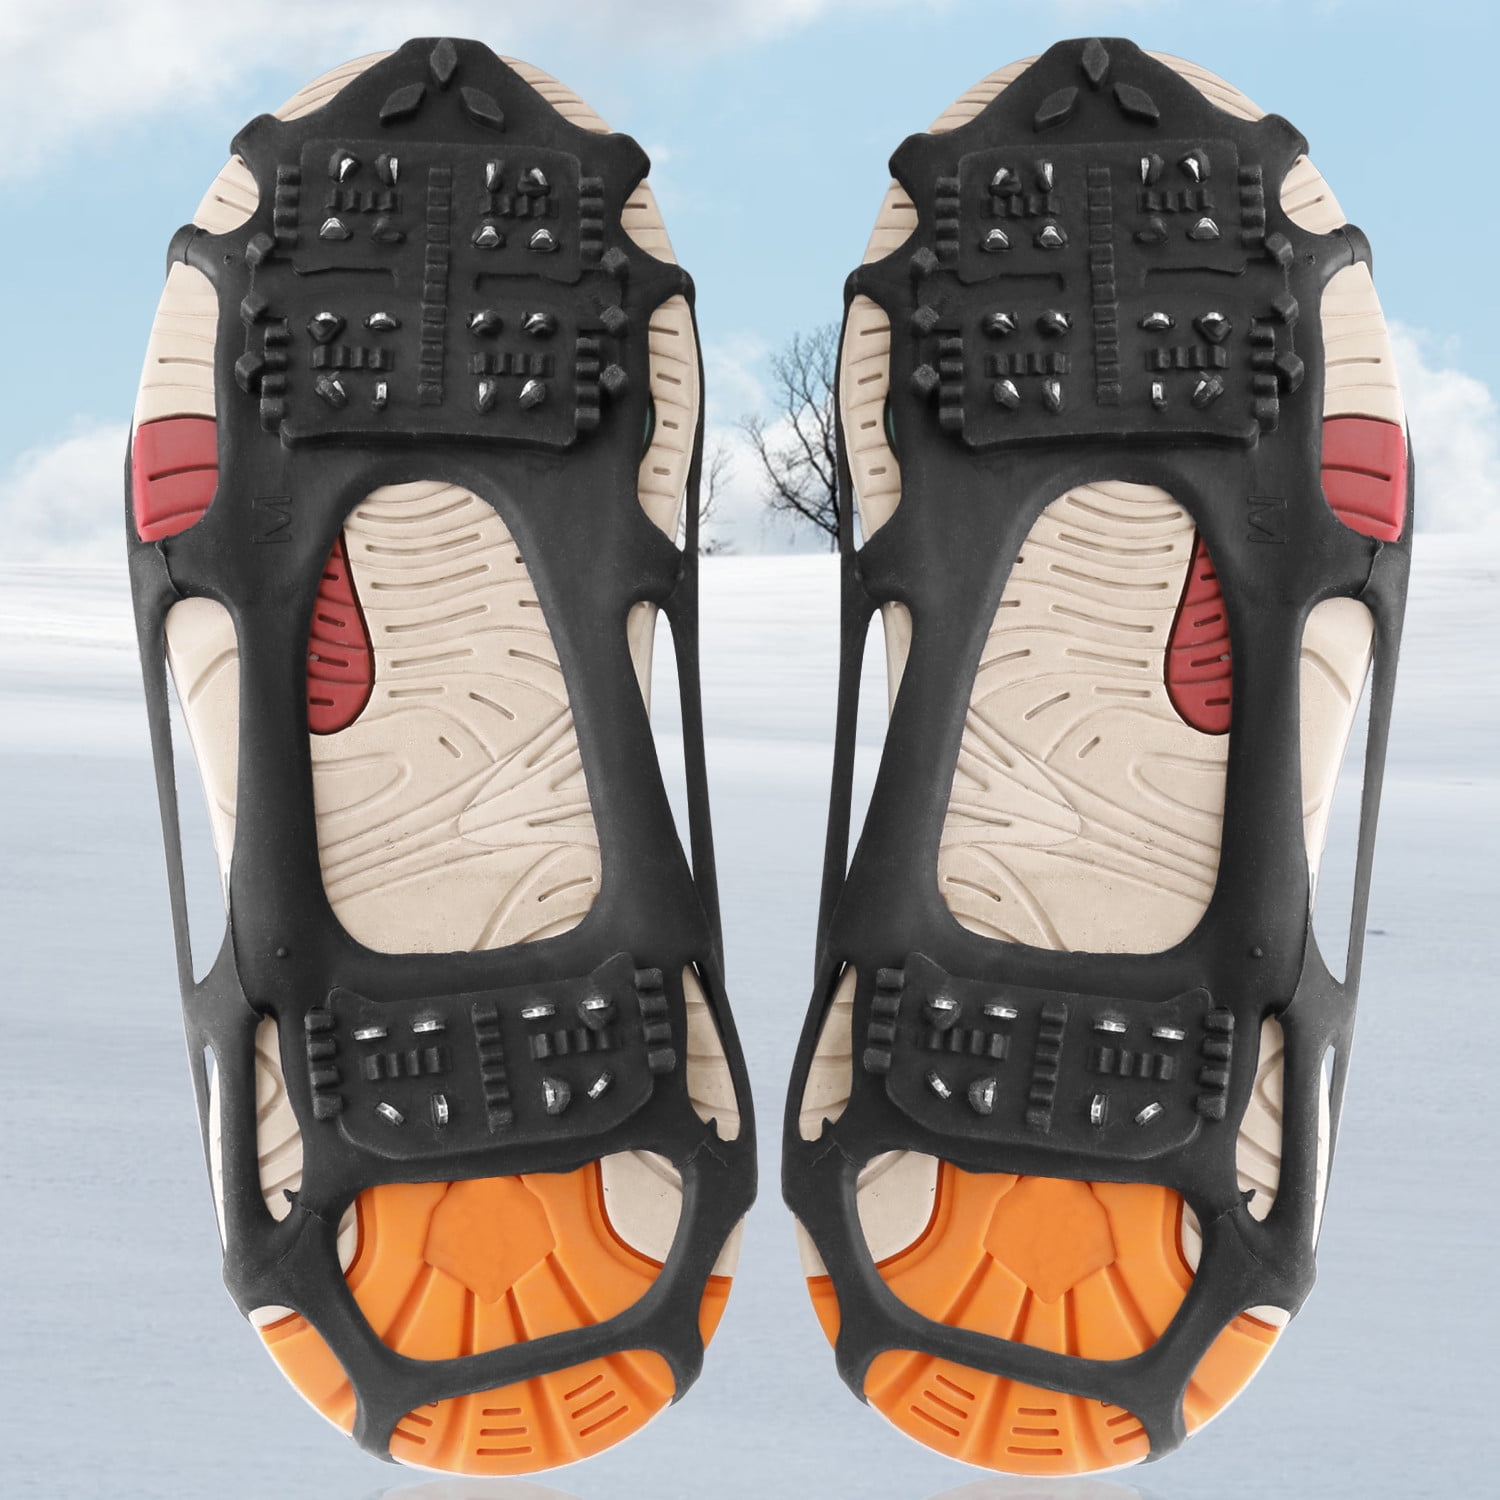 Kalevel 2pcs Ice Snow Cleats Traction Anti Slip Shoe Grip Cover Boot Rubber  Spikes Over Shoe Pro Walk Traction - Easy Slip On Ice Grippers Attachment  for Shoes and Boots for Men